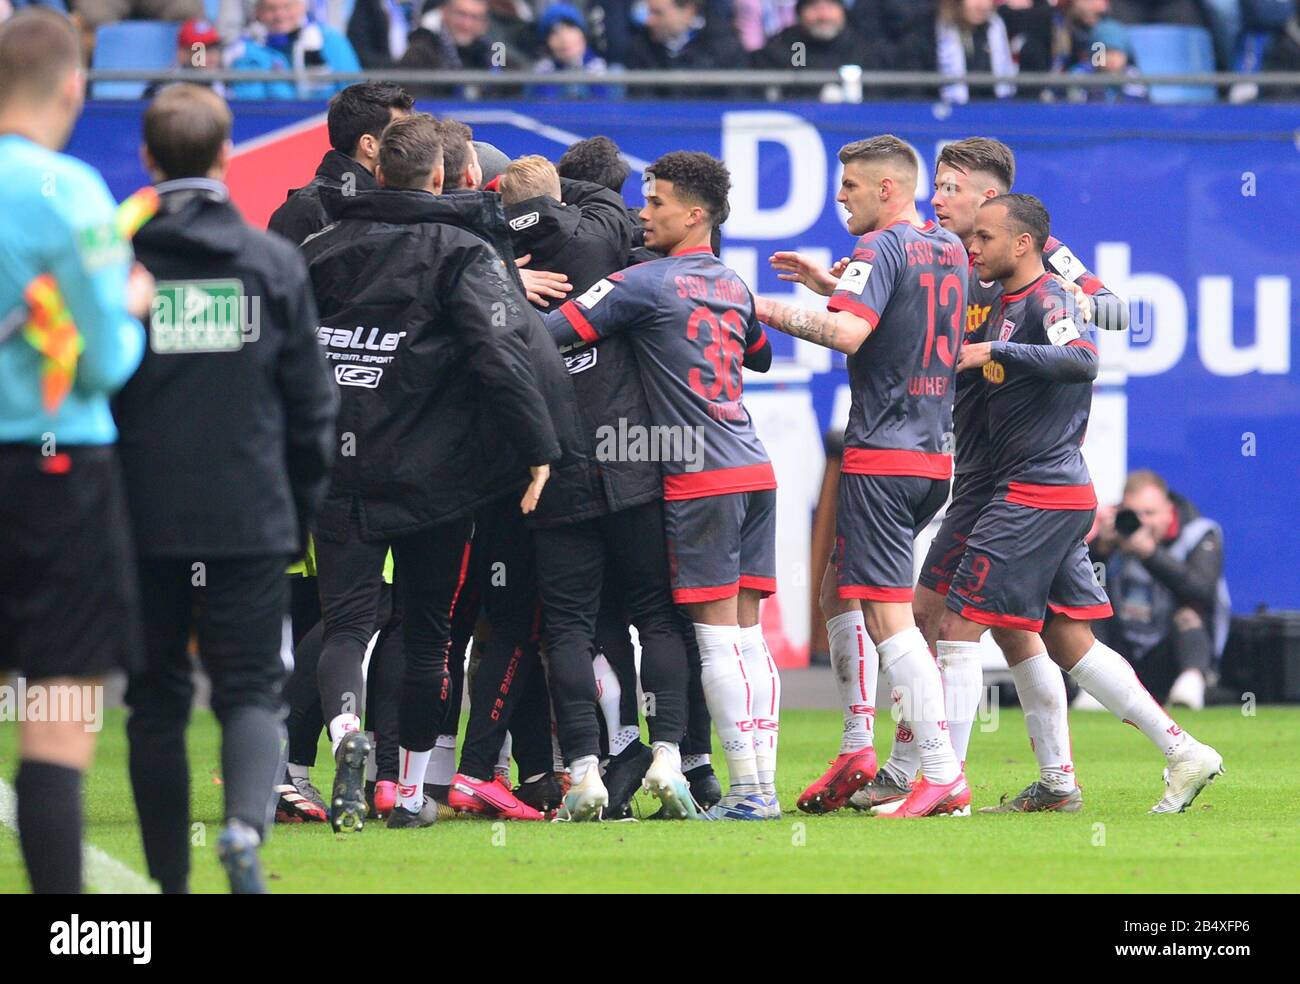 Hamburg, Germany. 07th Mar, 2020. Football: 2nd Bundesliga, 25th matchday: Hamburger SV - Jahn Regensburg in the Volksparkstadion. Regensburg's players cheer after the goal for 1:1. Credit: Daniel Bockwoldt/dpa - IMPORTANT NOTE: In accordance with the regulations of the DFL Deutsche Fußball Liga and the DFB Deutscher Fußball-Bund, it is prohibited to exploit or have exploited in the stadium and/or from the game taken photographs in the form of sequence images and/or video-like photo series./dpa/Alamy Live News Stock Photo